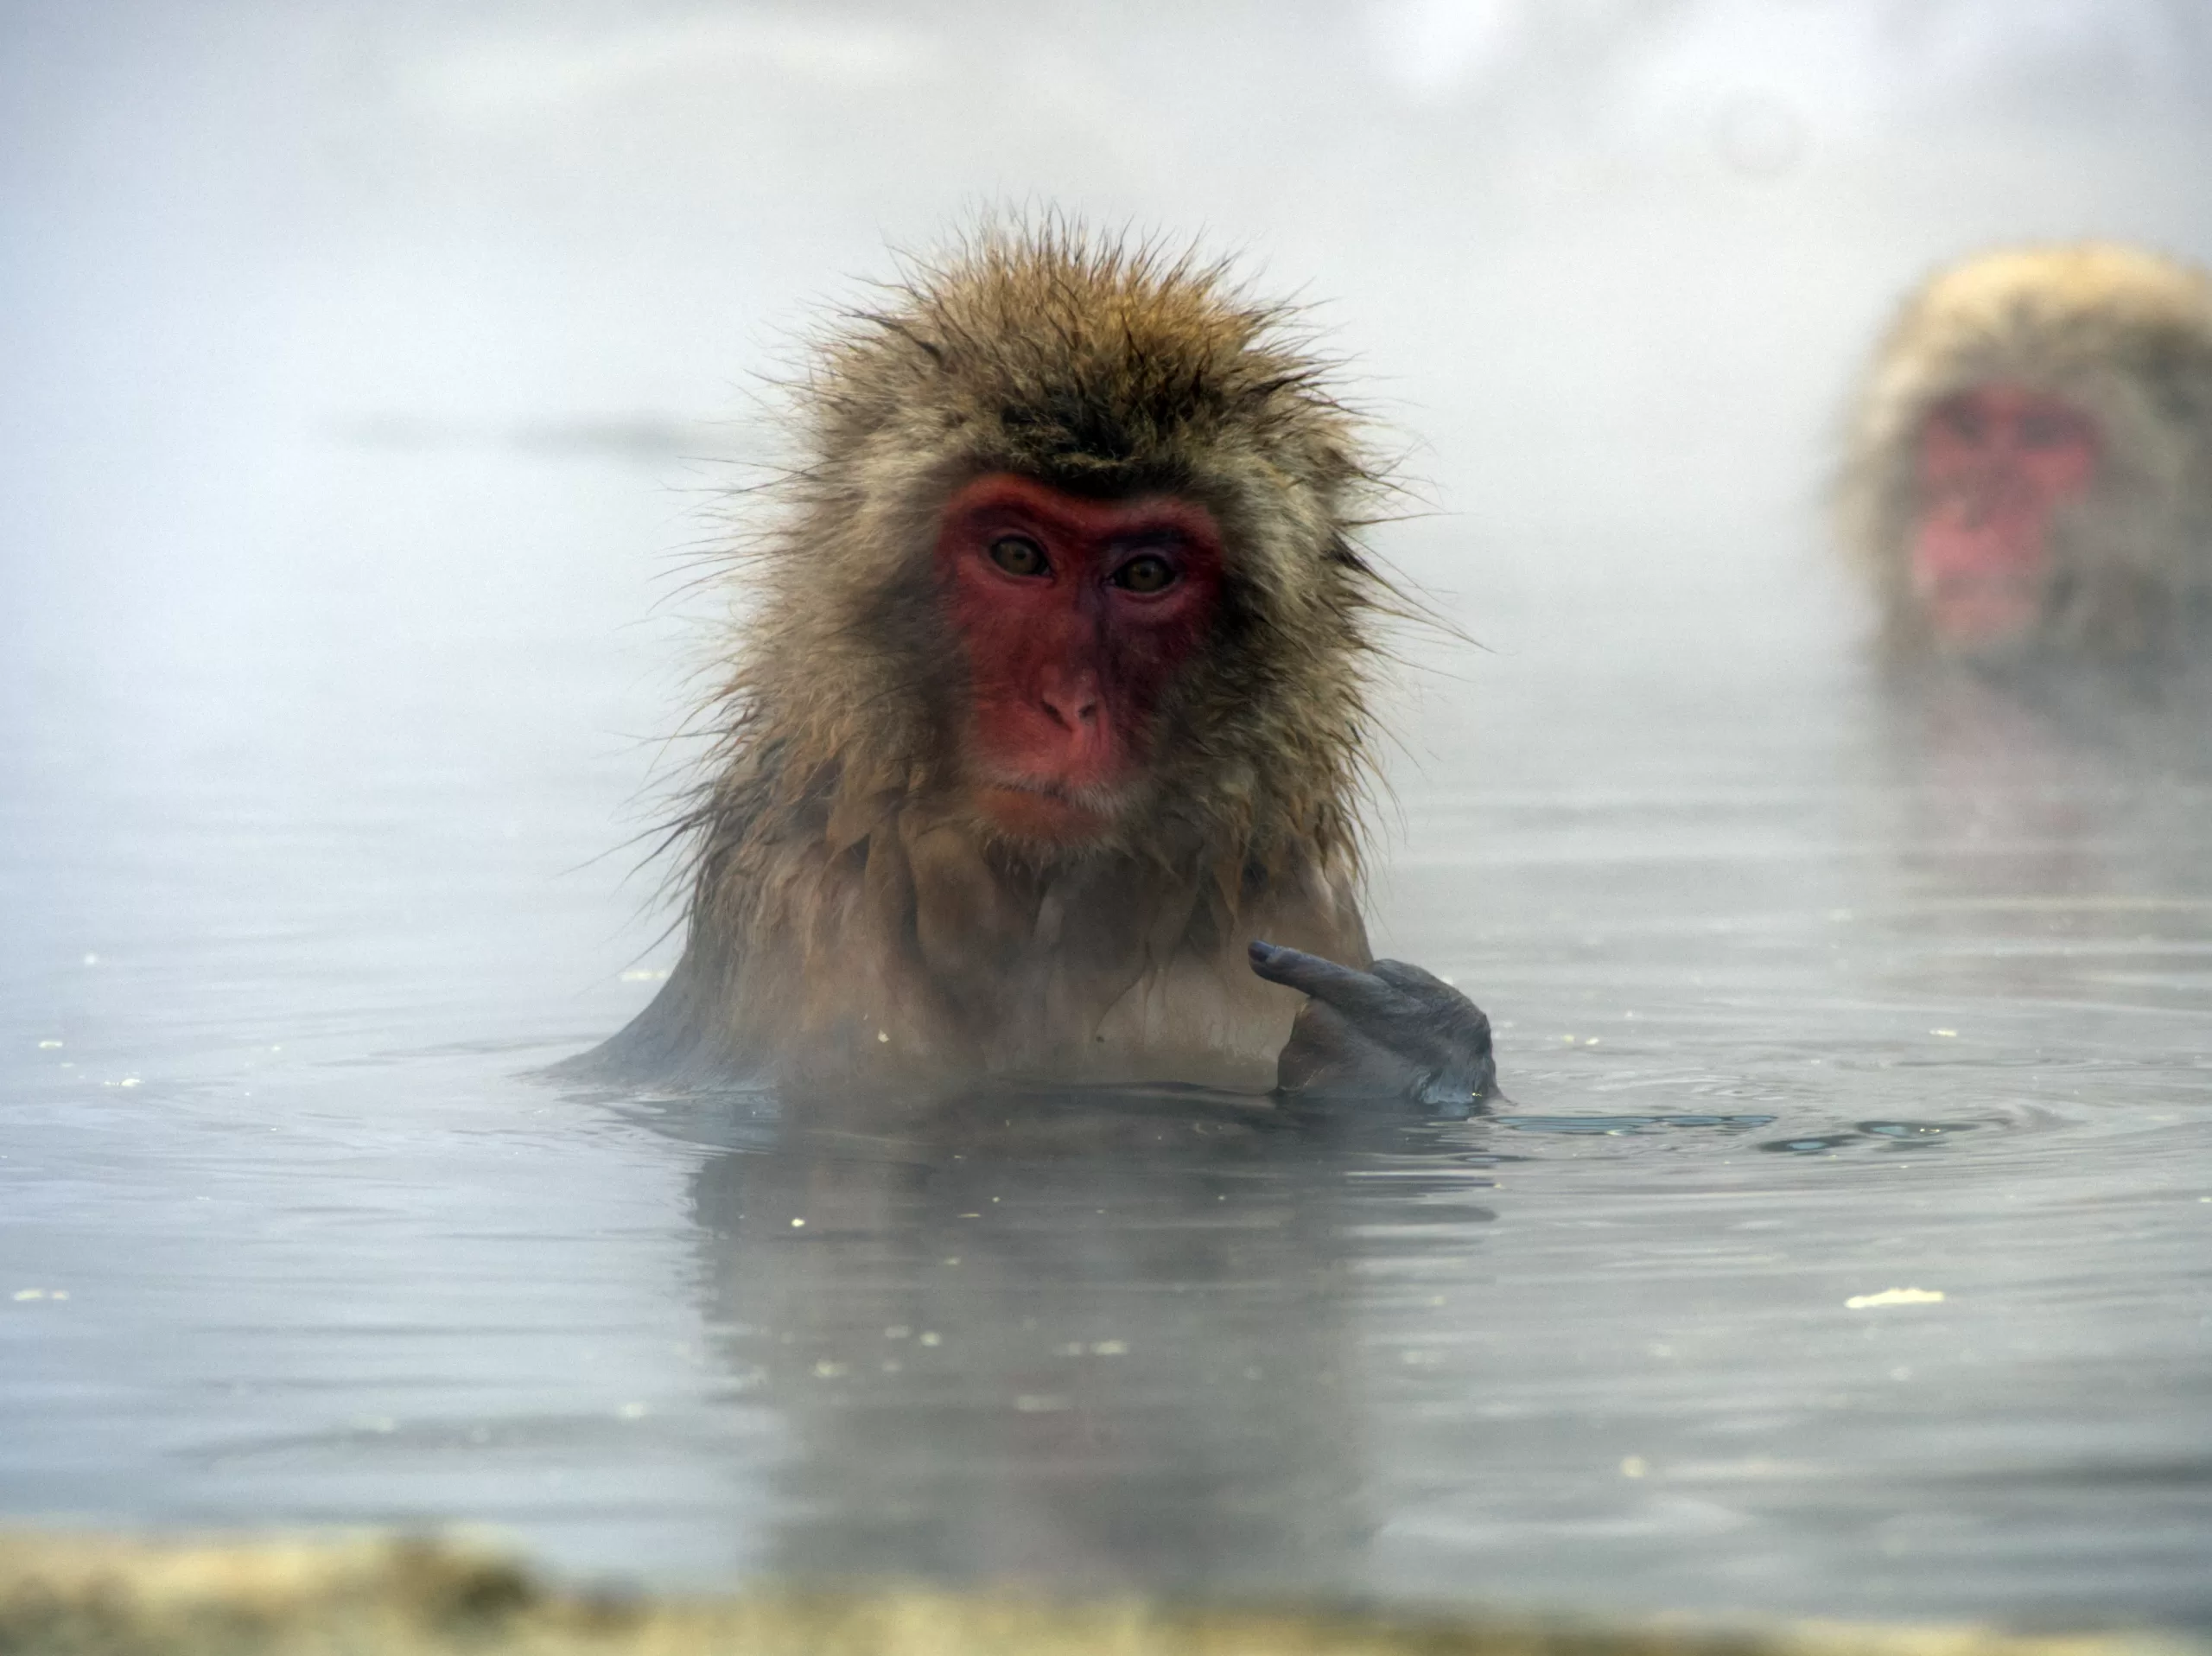 A snow monkey in water looks at the camera inquisitively